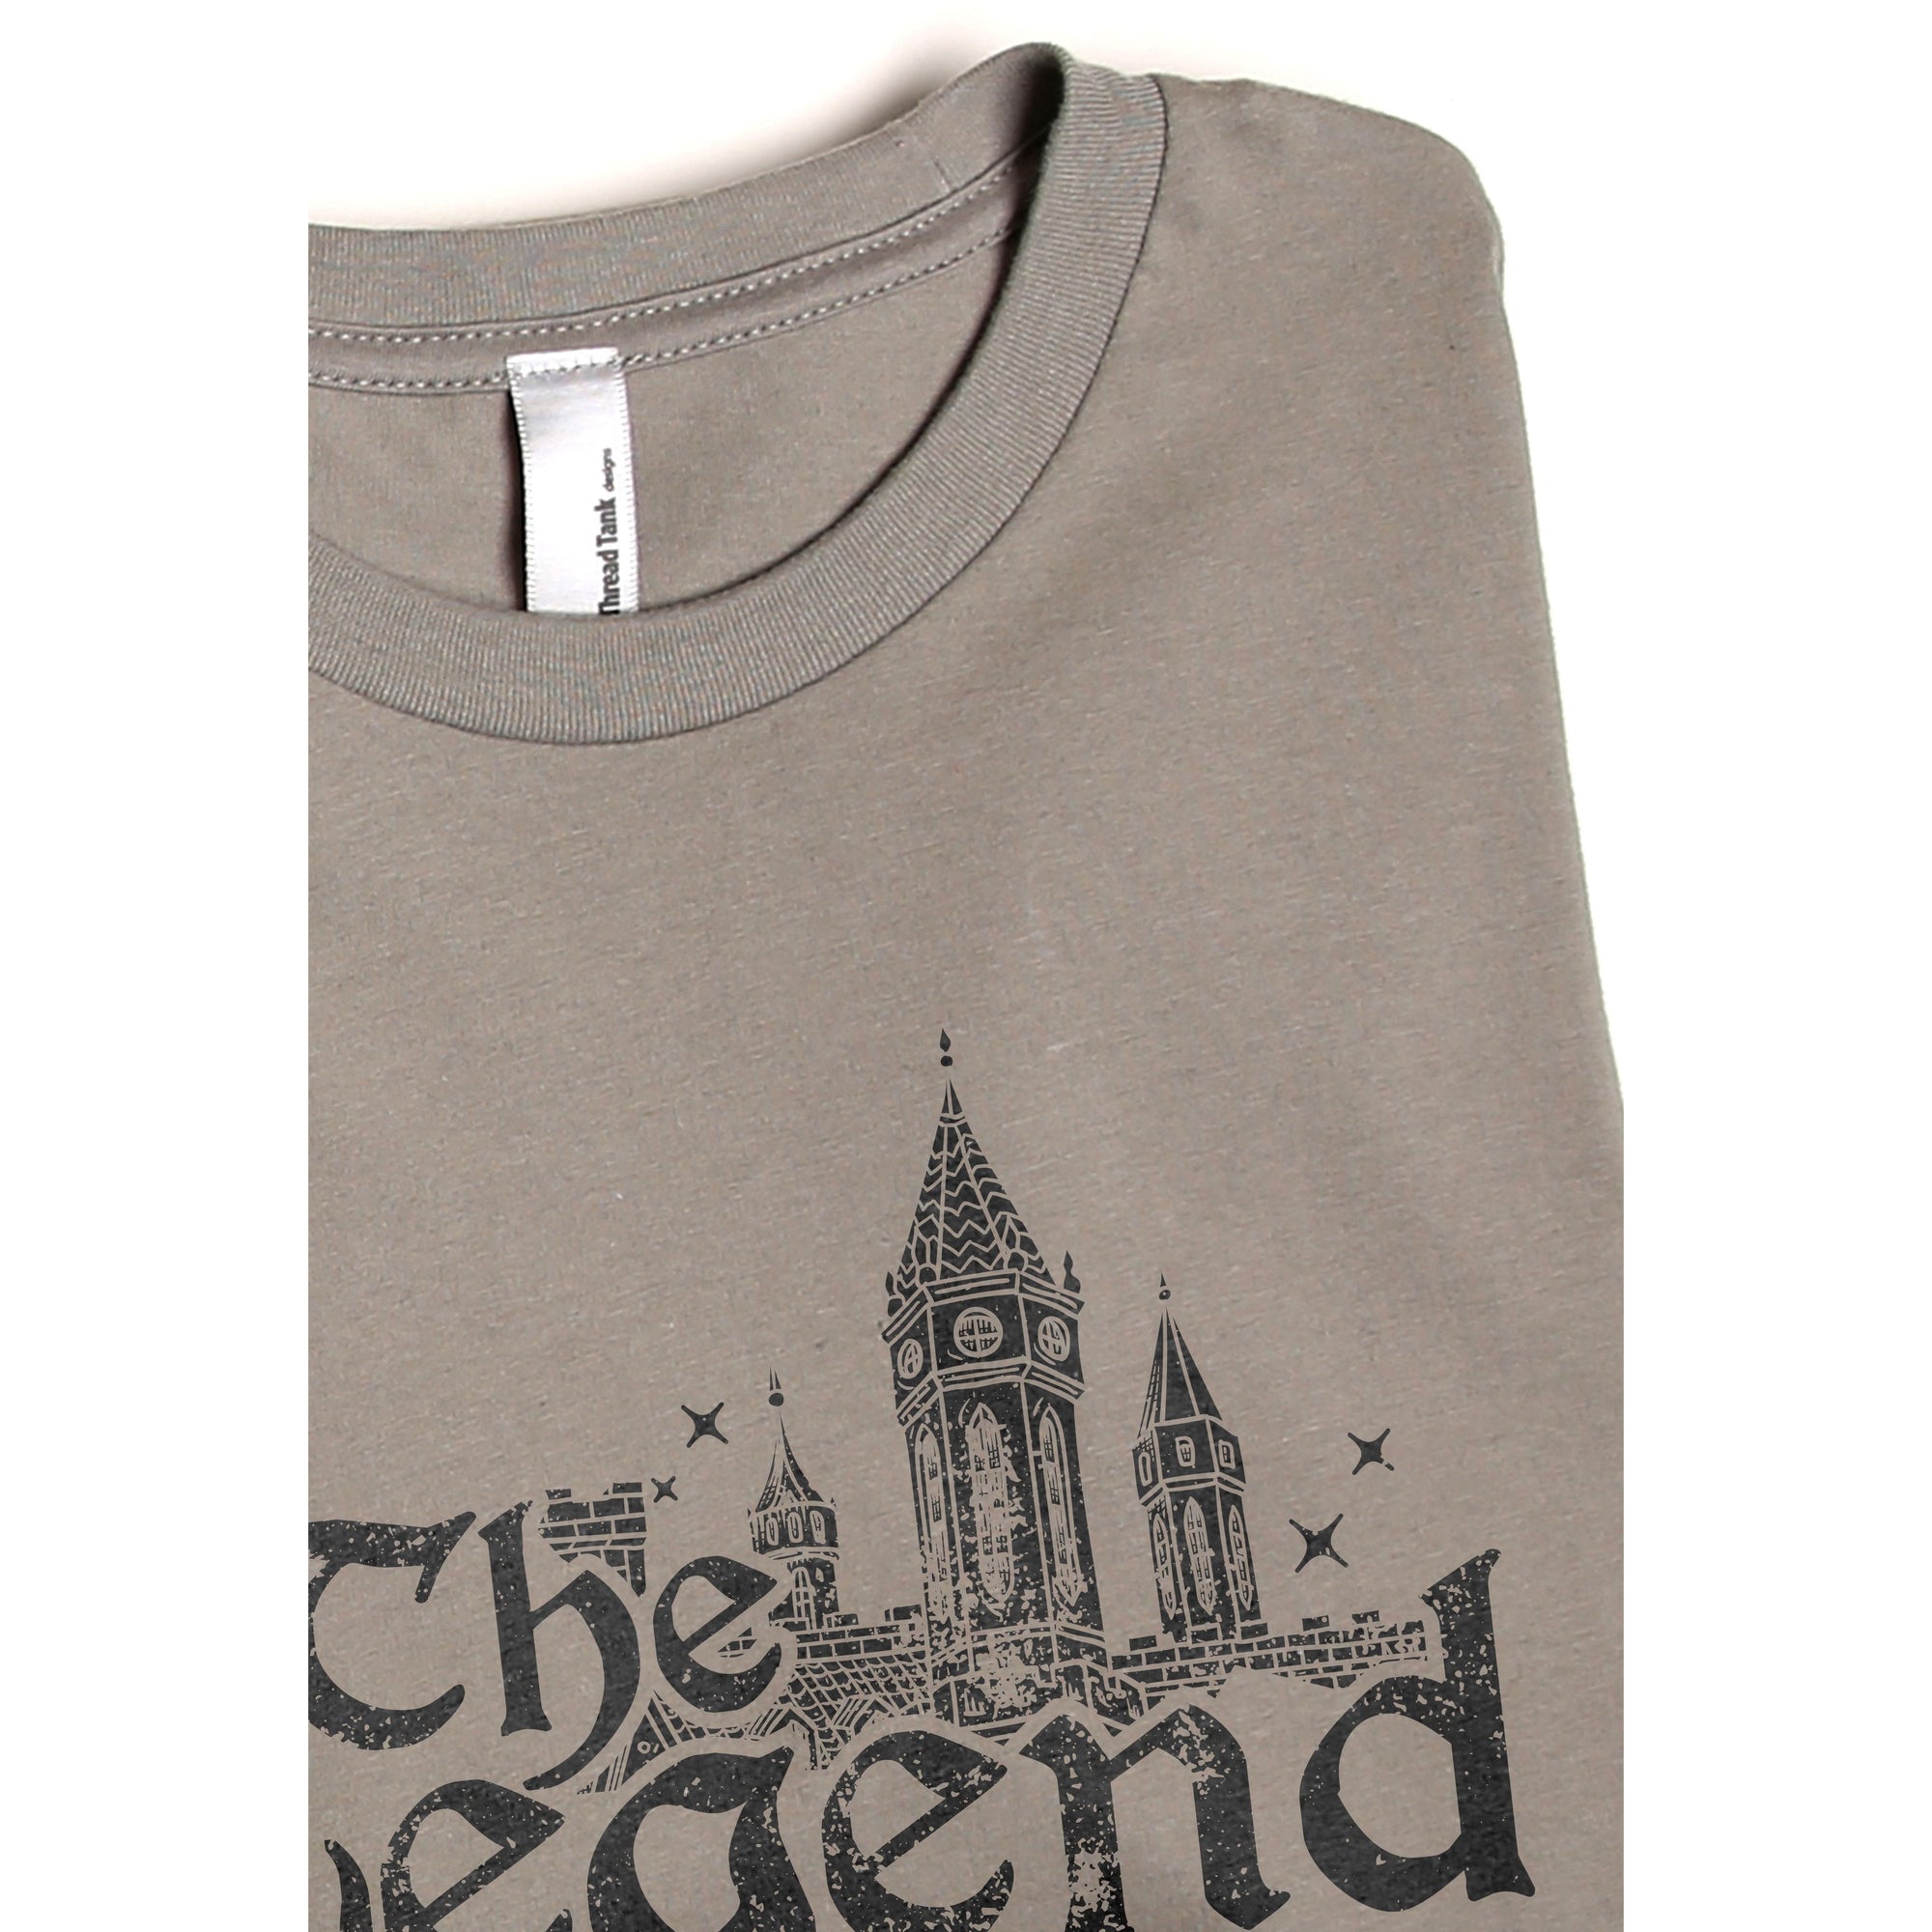 The Legend - thread tank | Stories you can wear.